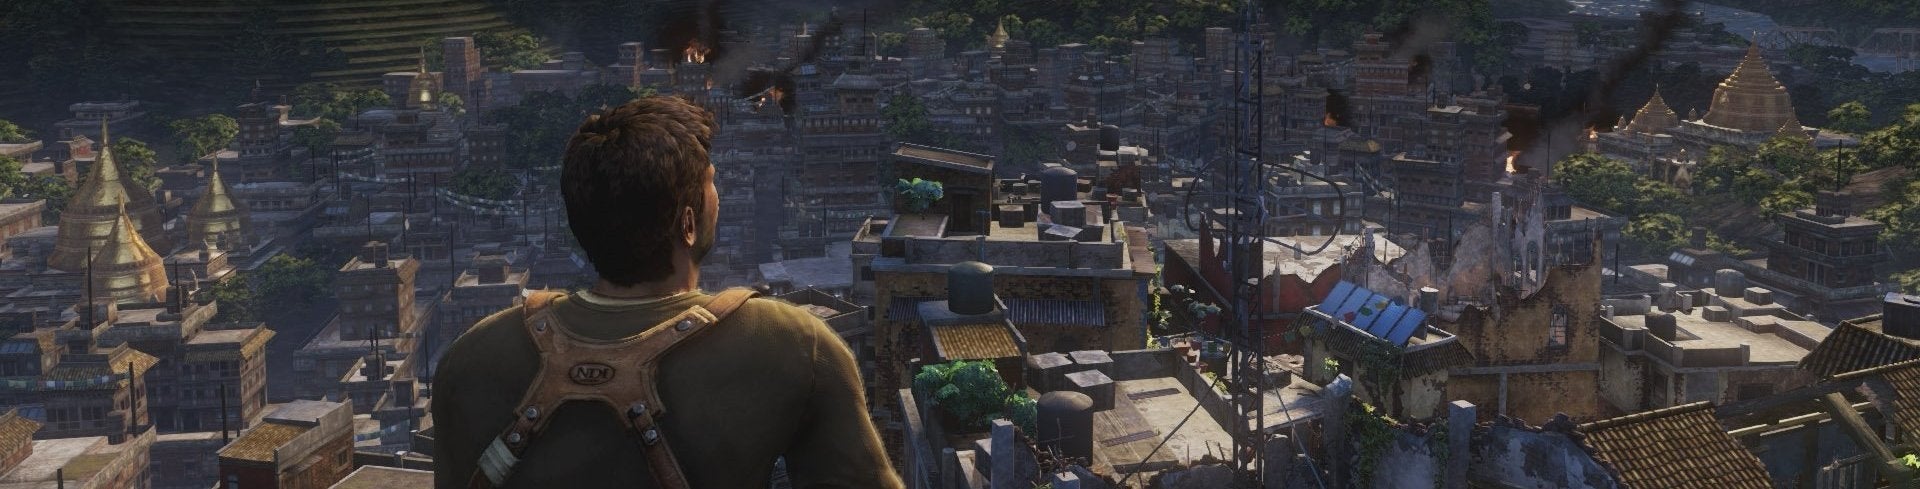 Image for Porovnání Uncharted 2 na PS4 a PS3